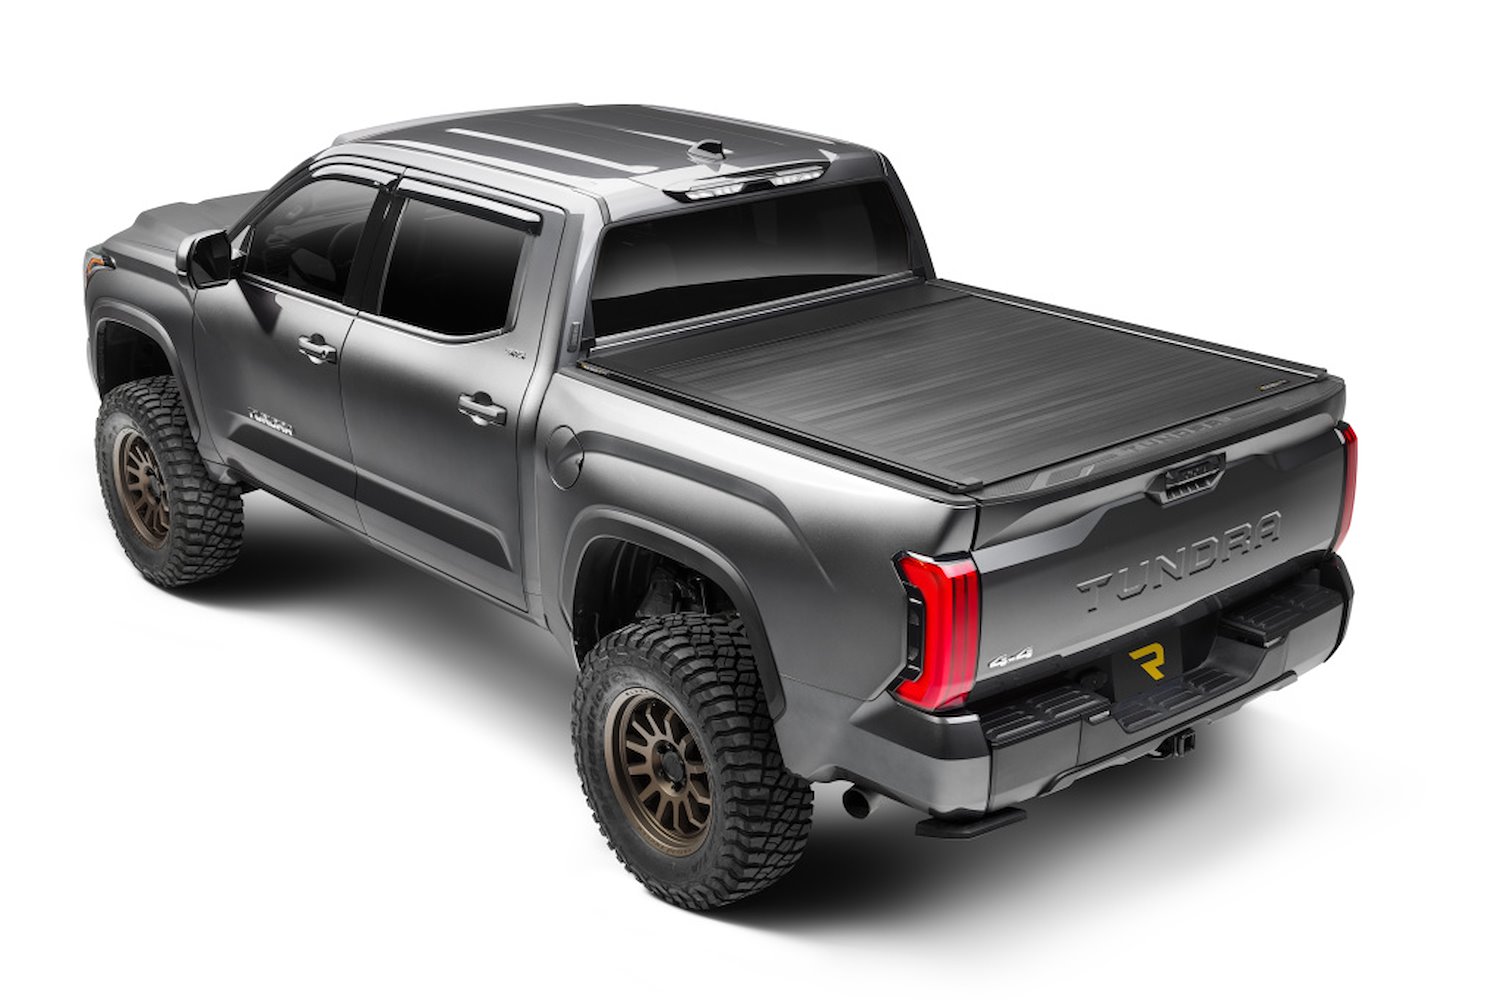 EQ0231 EQ Retractable Tonneau Cover Fits Select Dodge/Ram 5' 7" Bed without RamBox without Stake Pockets